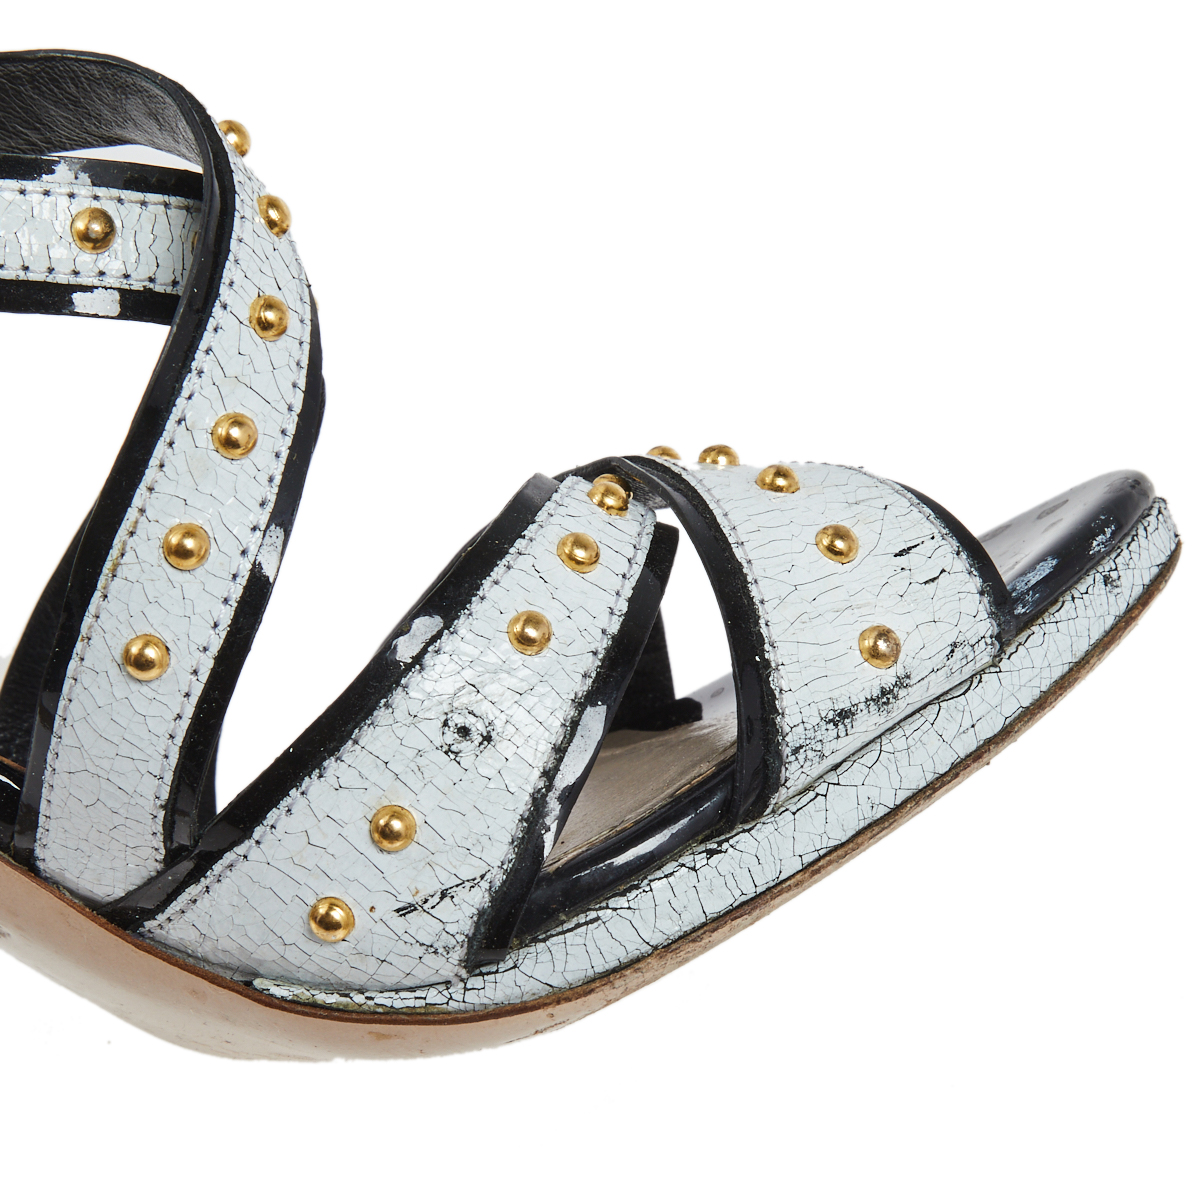 Miu Miu White Studded Crackled Leather Ankle-Strap Sandals Size 39